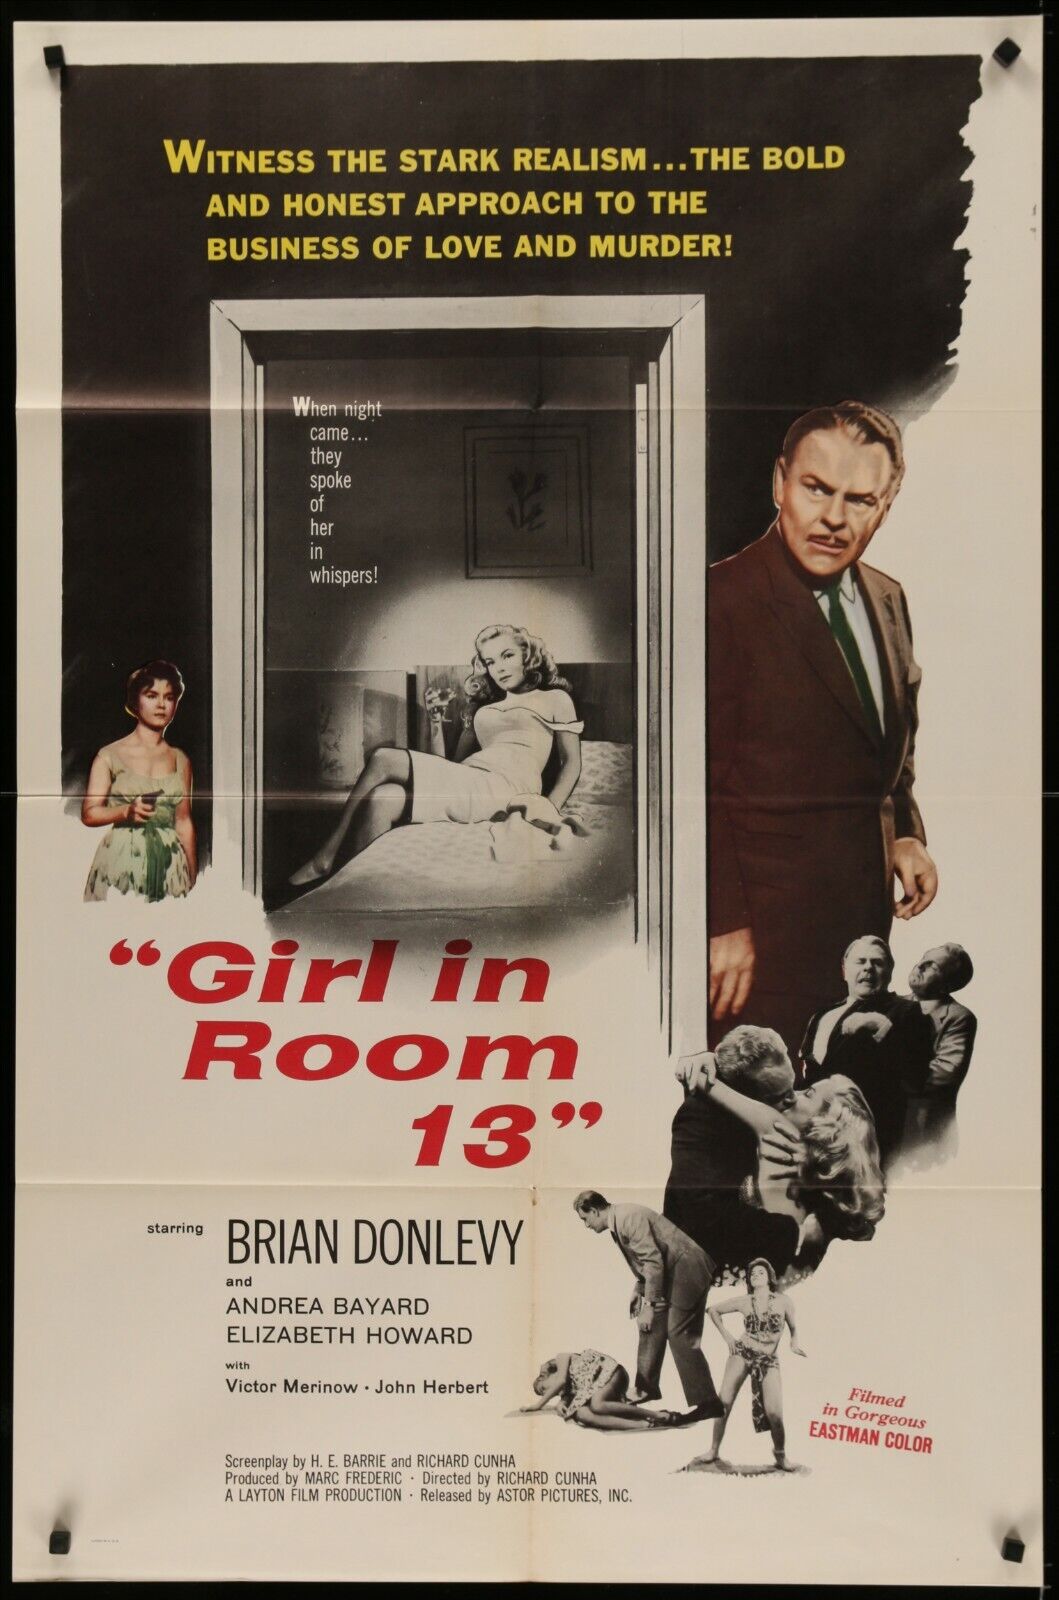 GIRL IN ROON 13 Brian Donleavy ORIGINAL 1961 1-SHEET MOVIE POSTER 27 x 41 